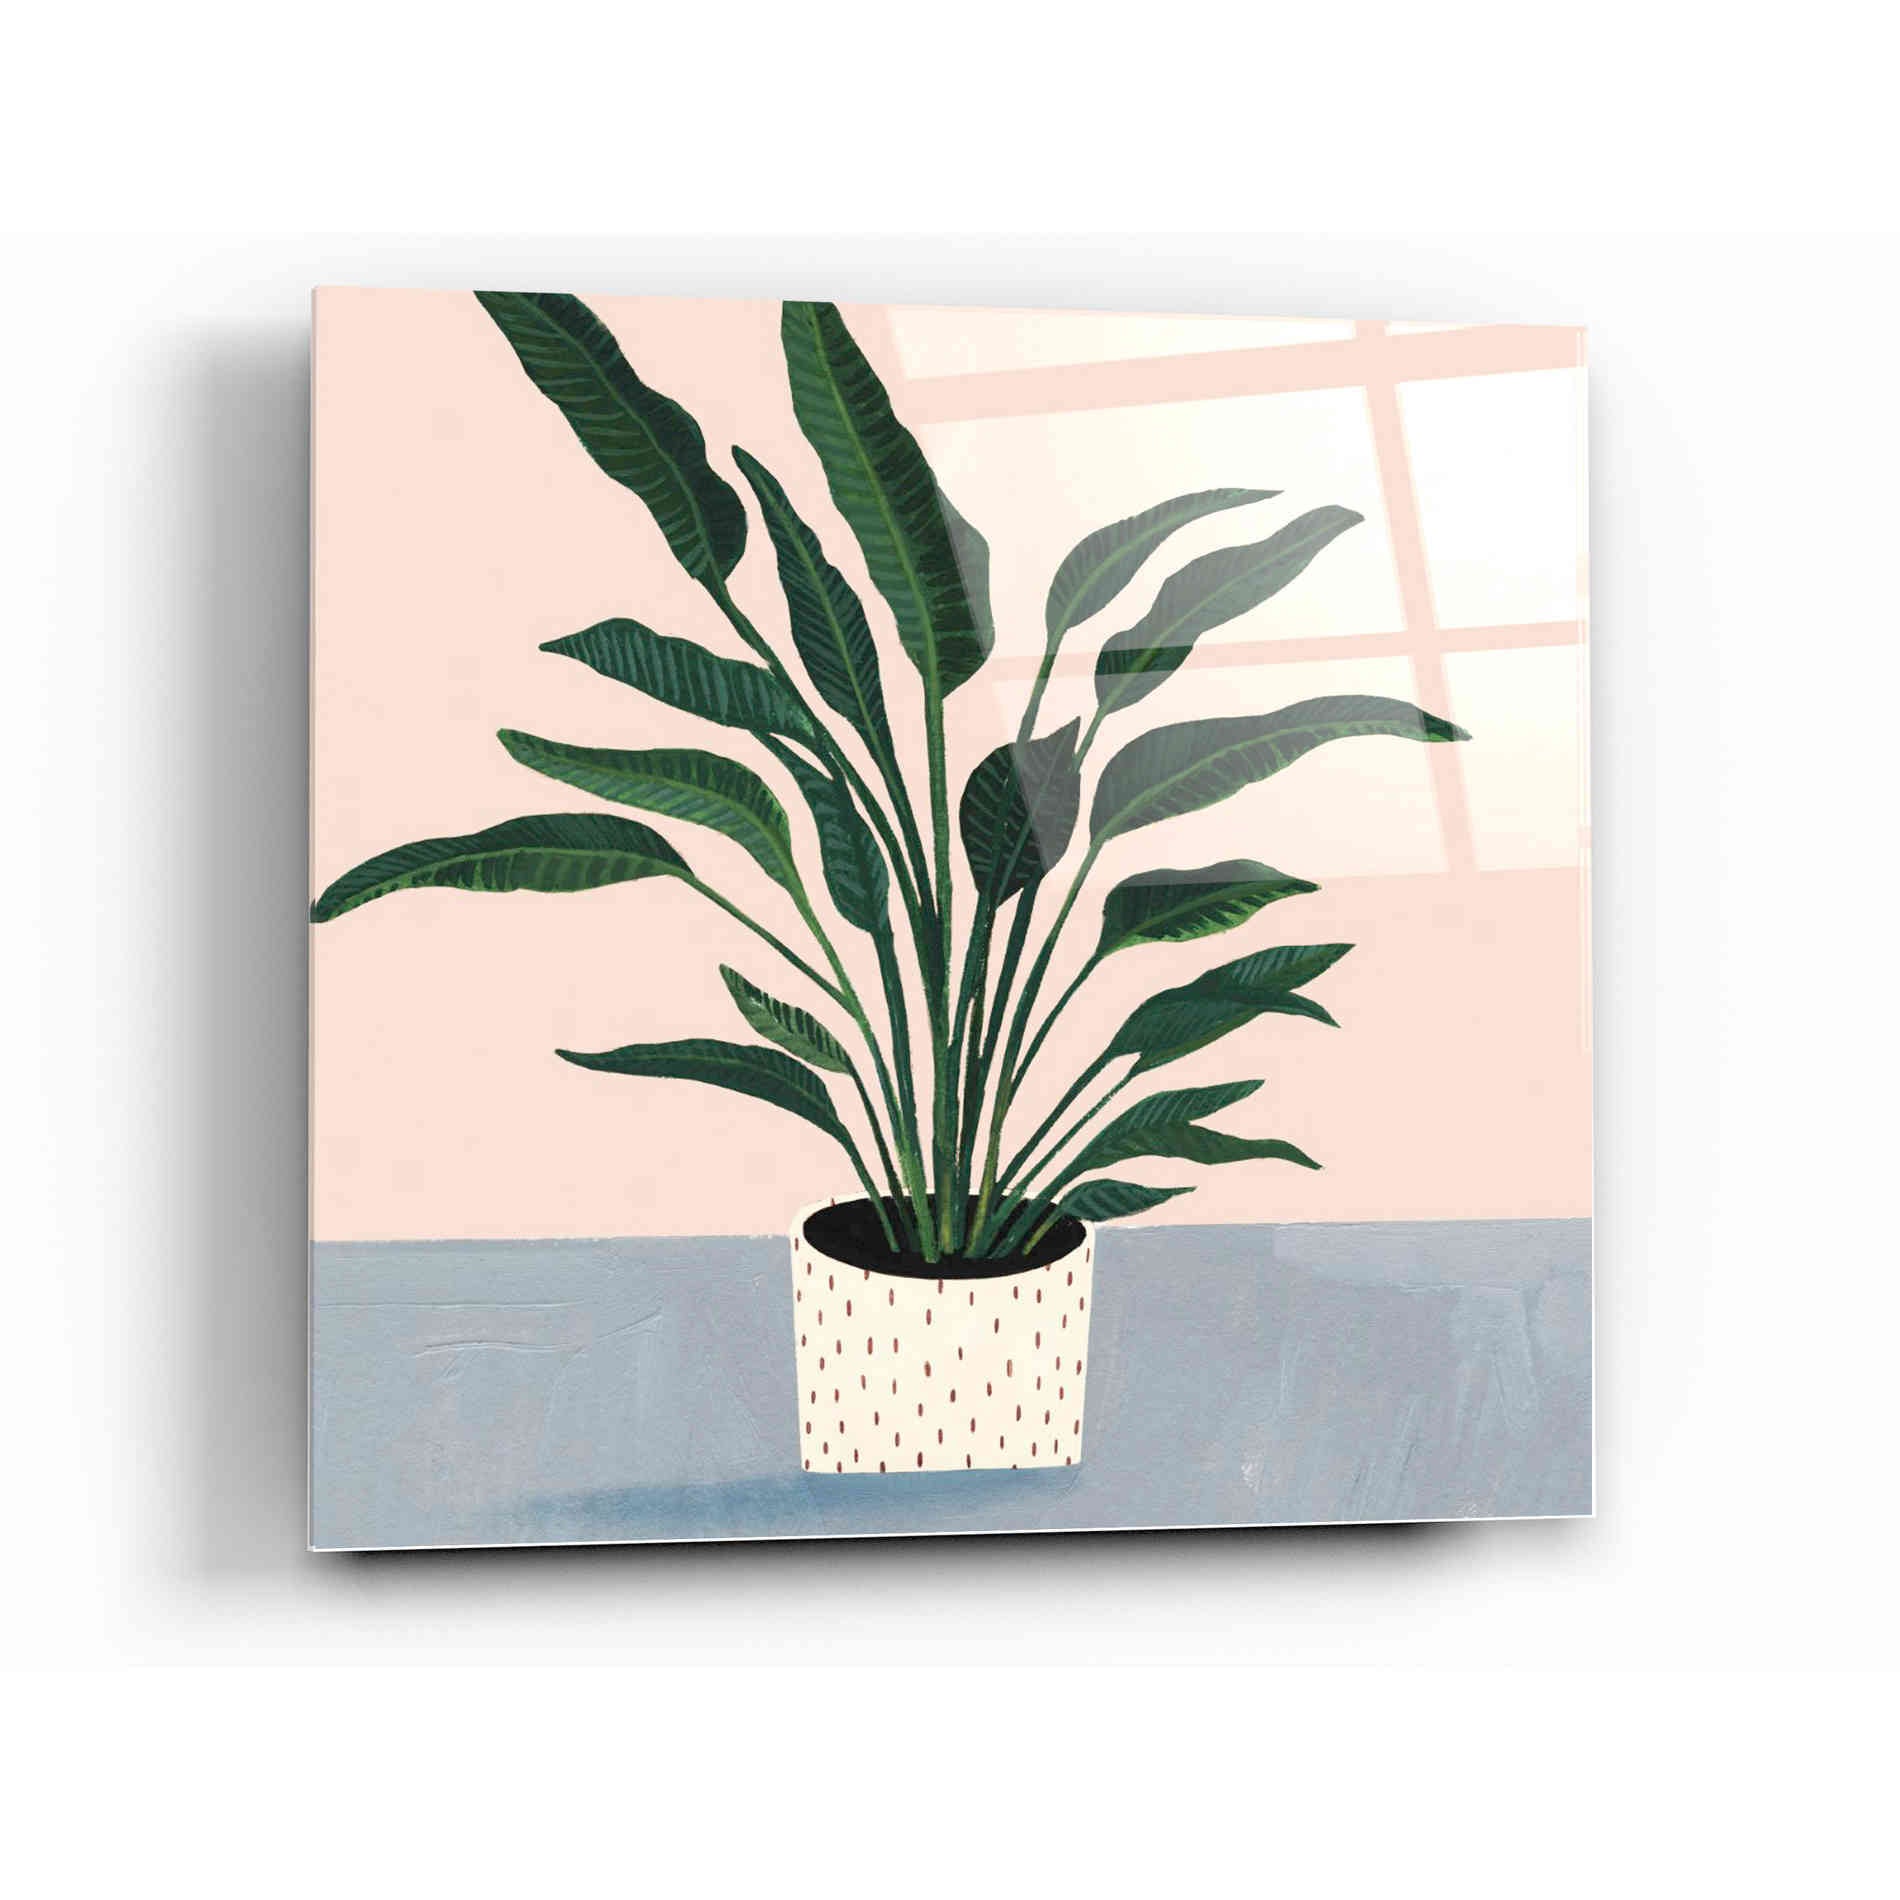 Epic Art 'Houseplant IV' by Victoria Borges Acrylic Glass Wall Art,12x12